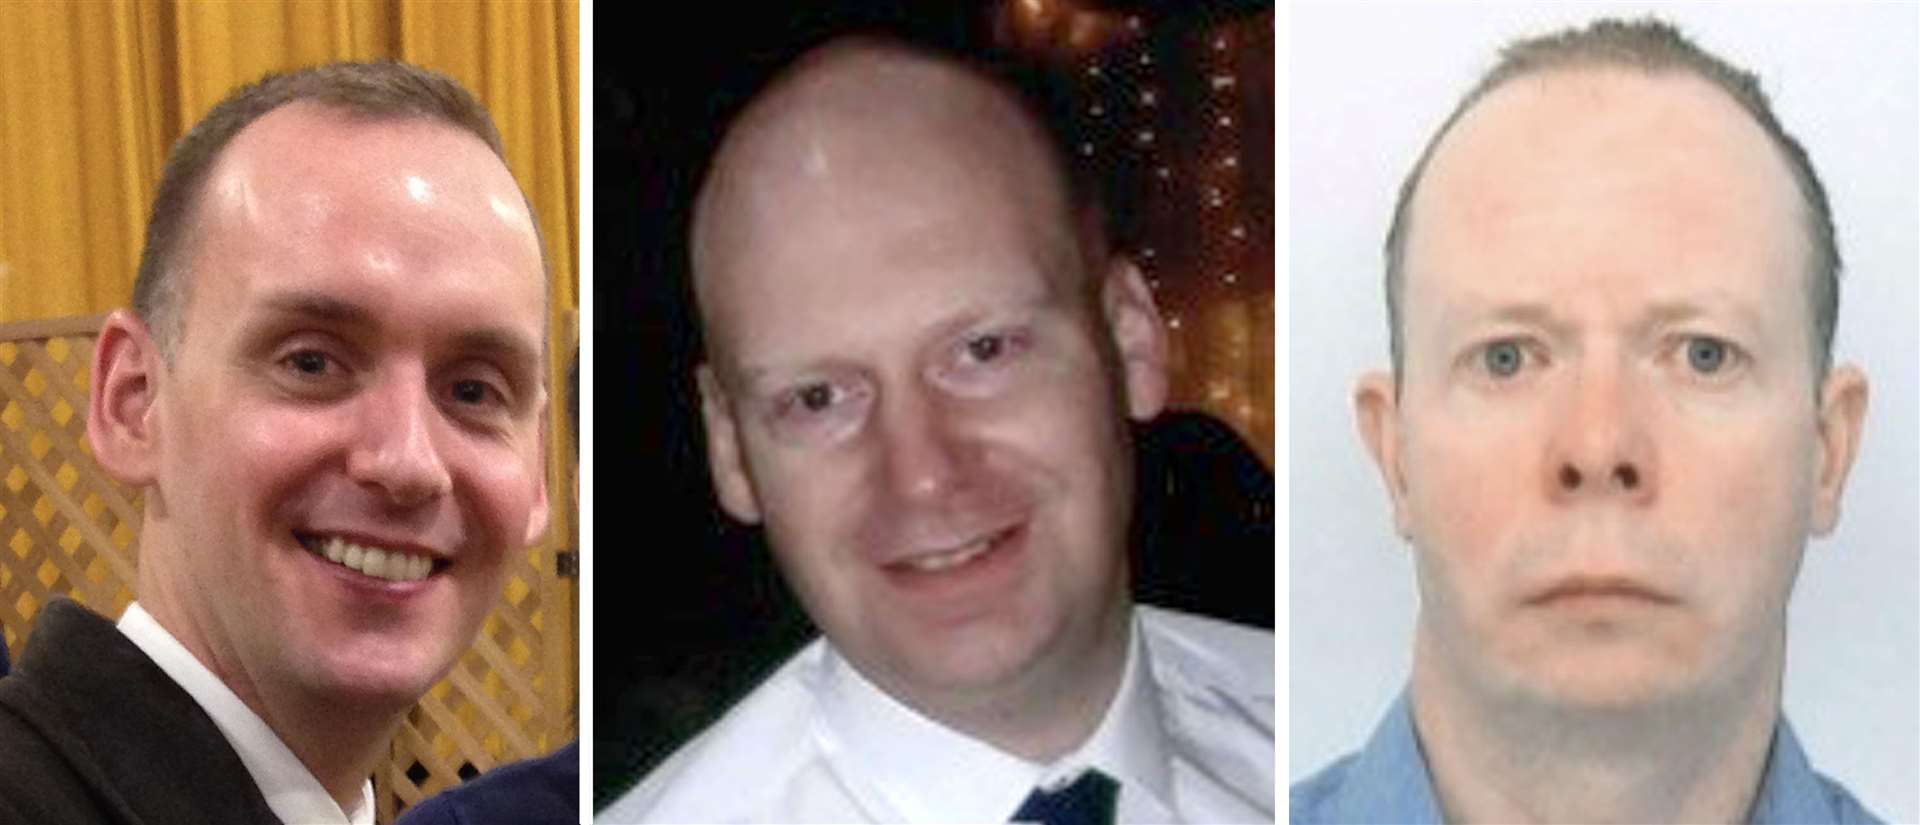 Joe Ritchie-Bennett, James Furlong and David Wails were killed in the attack (Family Handout/PA)